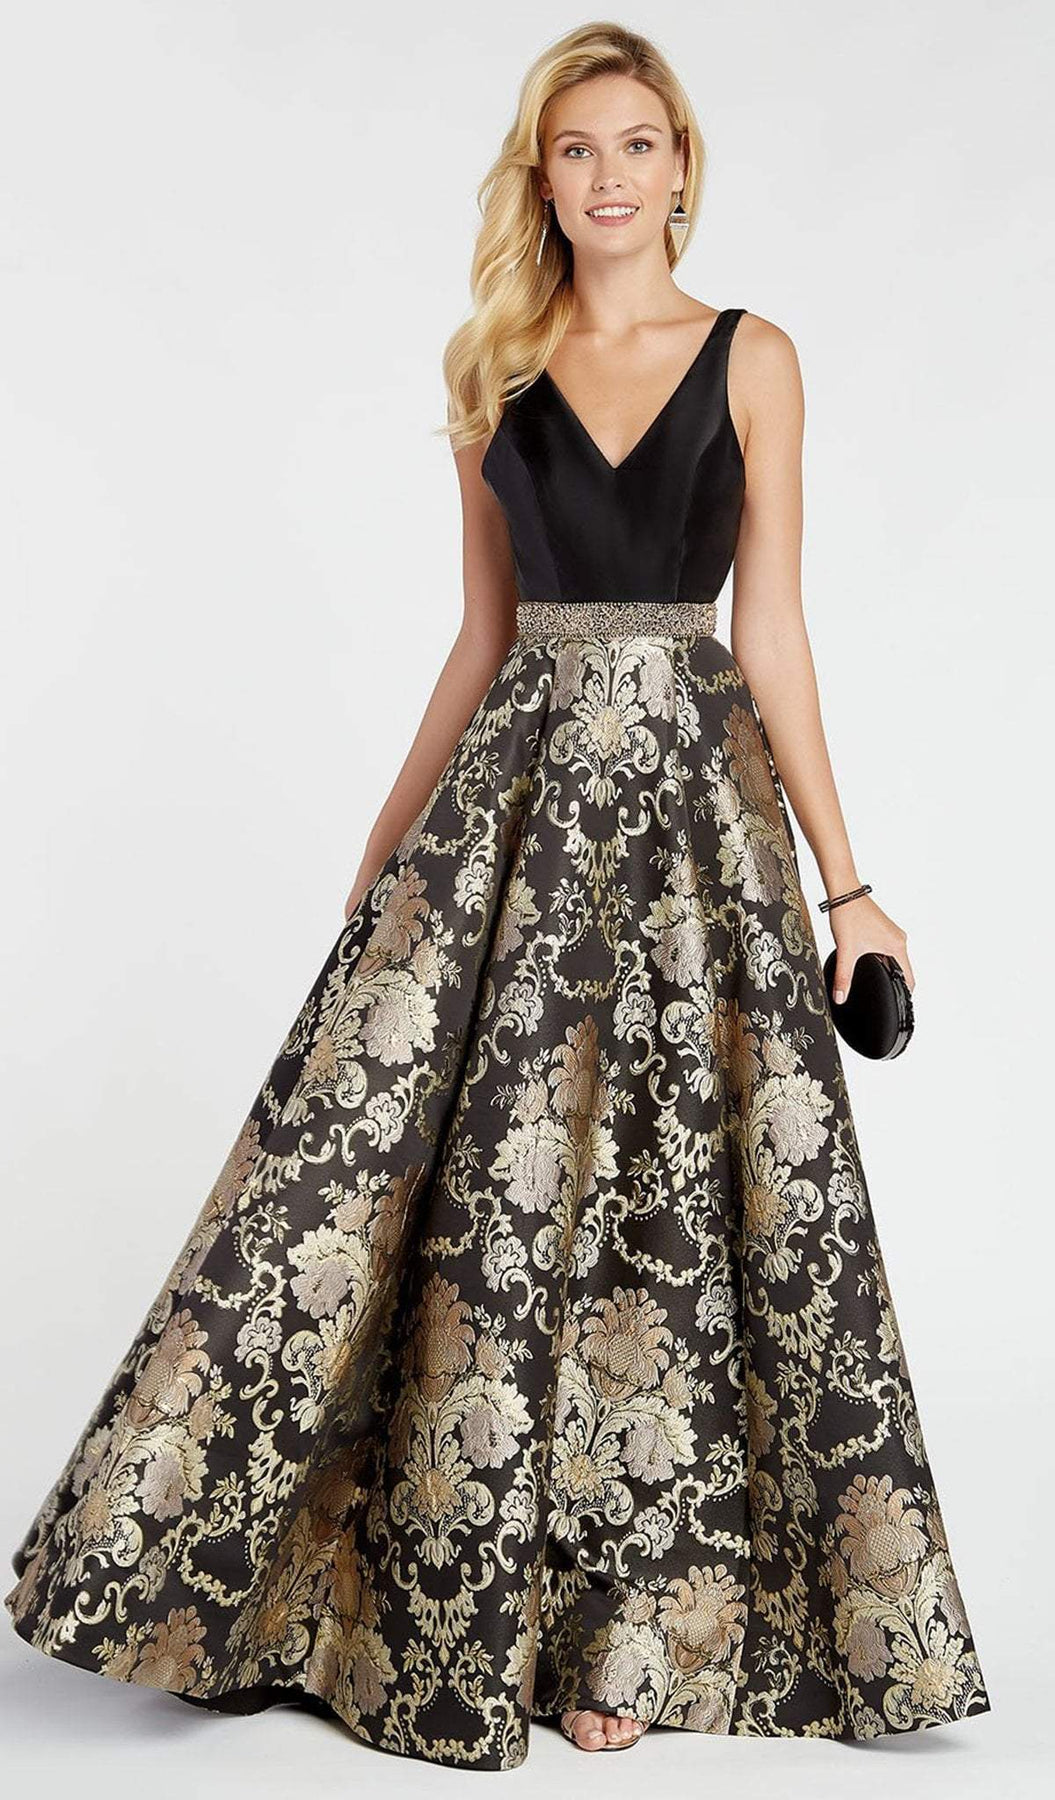 Alyce Paris - 60399 Sleeveless Floral Brocade A-Line Gown In Black and Gold